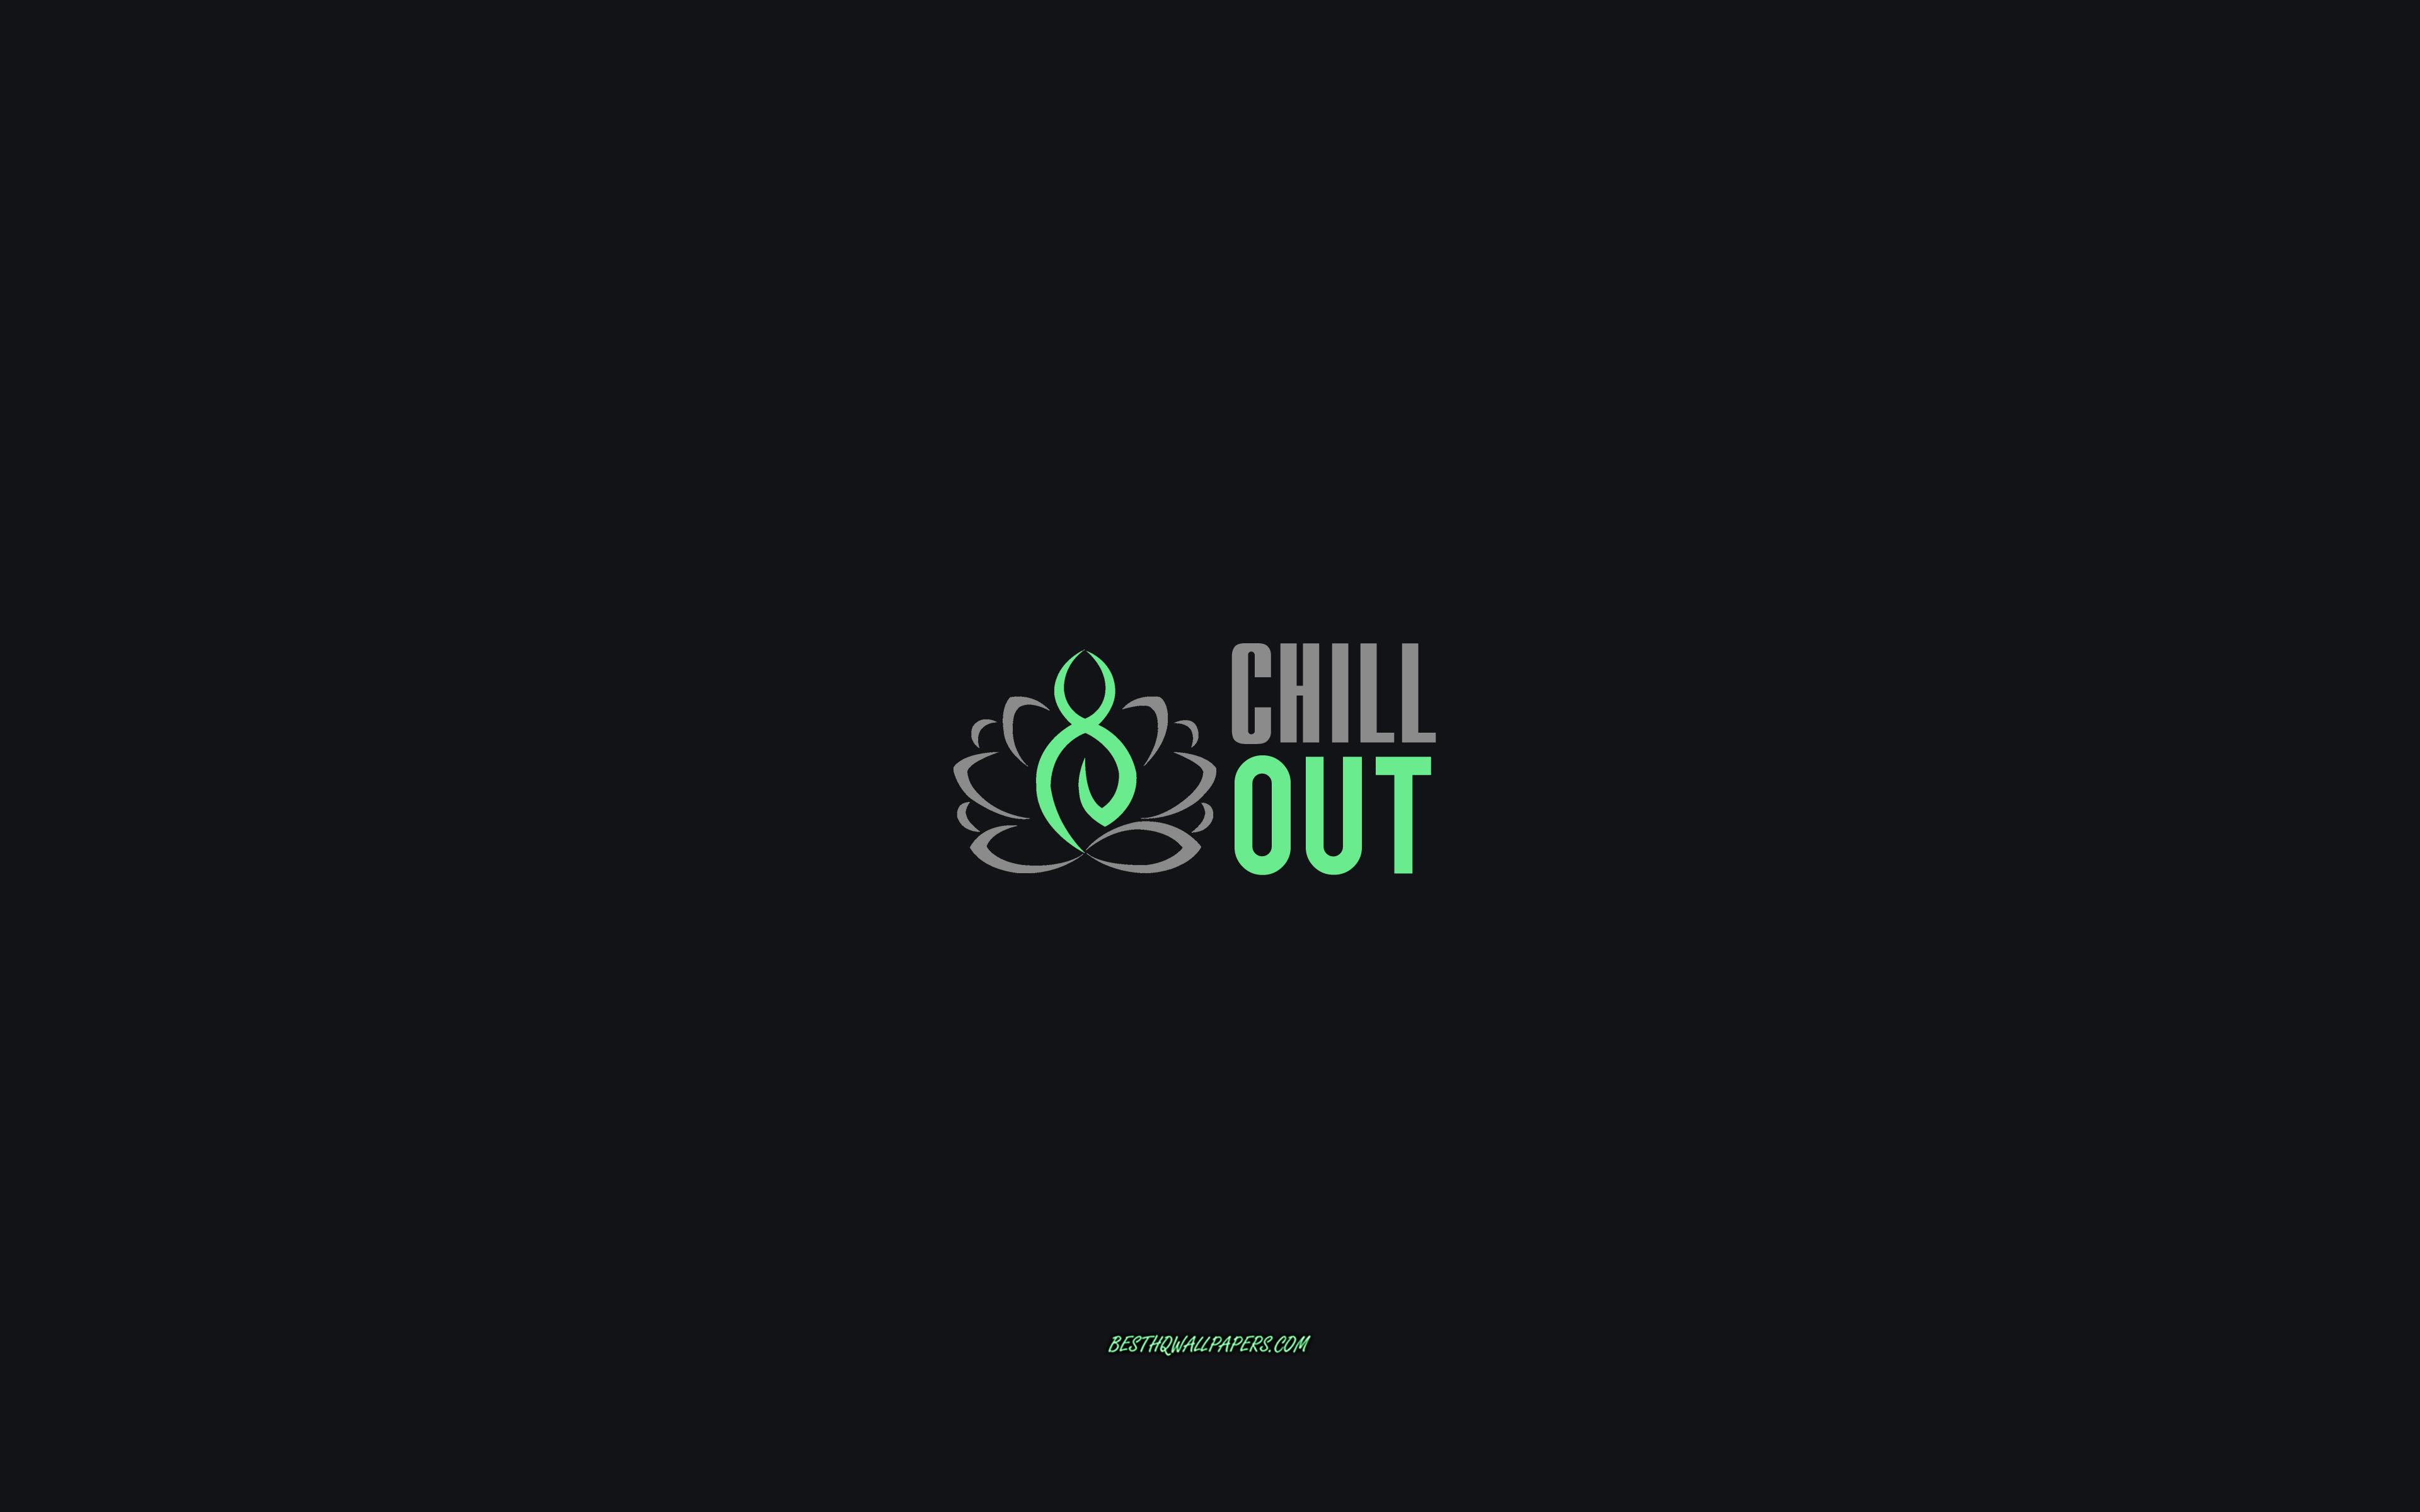 Download wallpaper Chill out, creative art, gray background